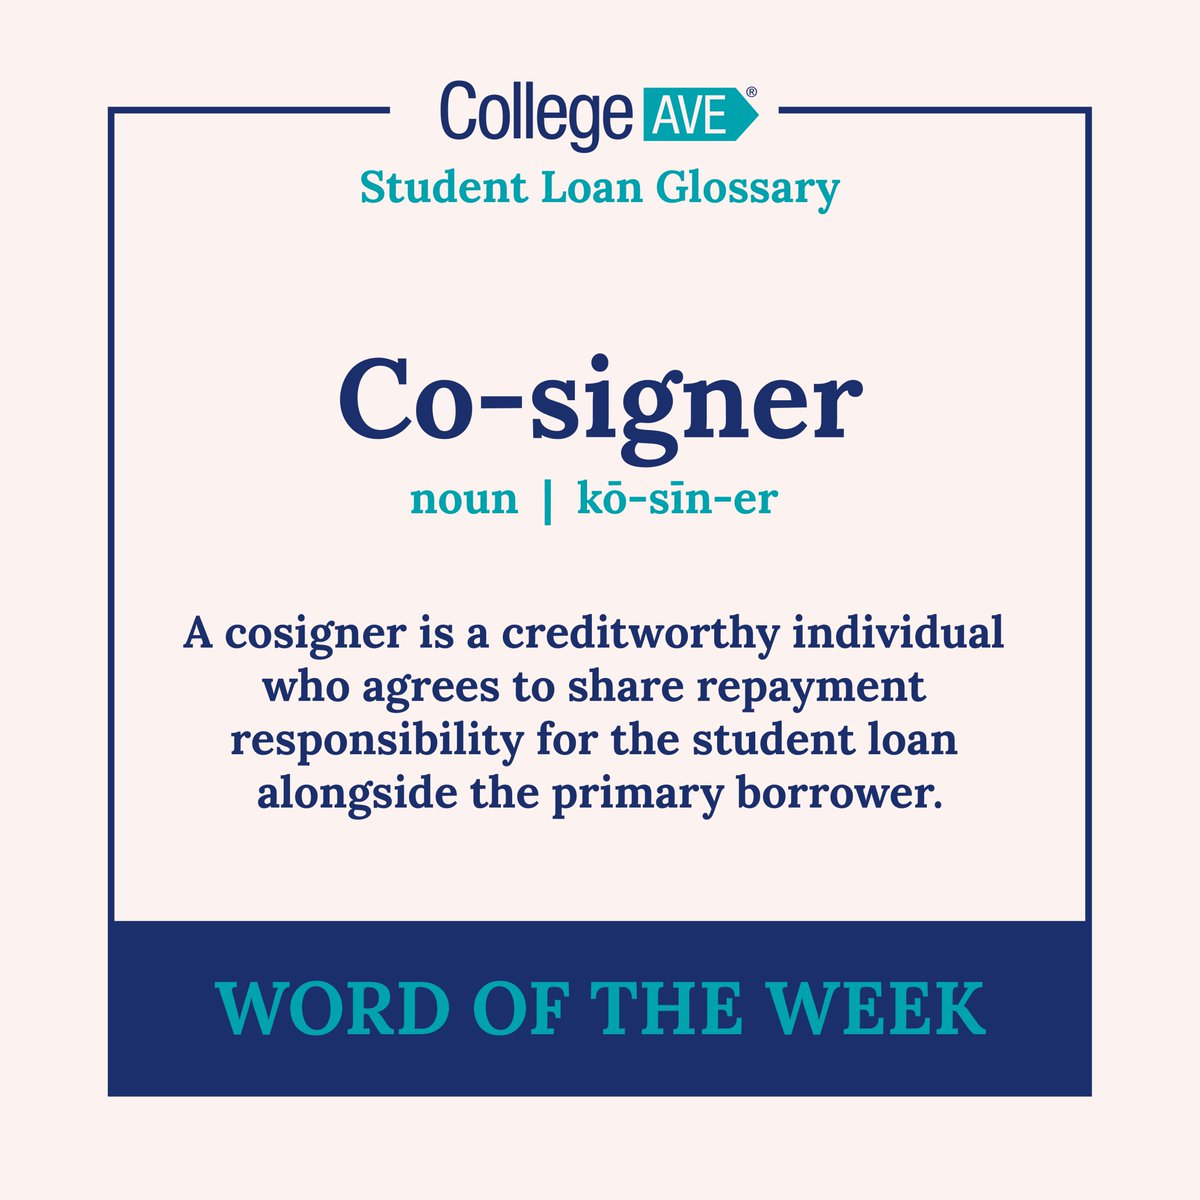 Did you know 97% of undergraduate loans require a cosigner? 📚Many students lack the necessary credit history or income qualifications to secure a loan independently. Click below to explore our glossary tool to help you understand financial terms! collegeave.link/glossary